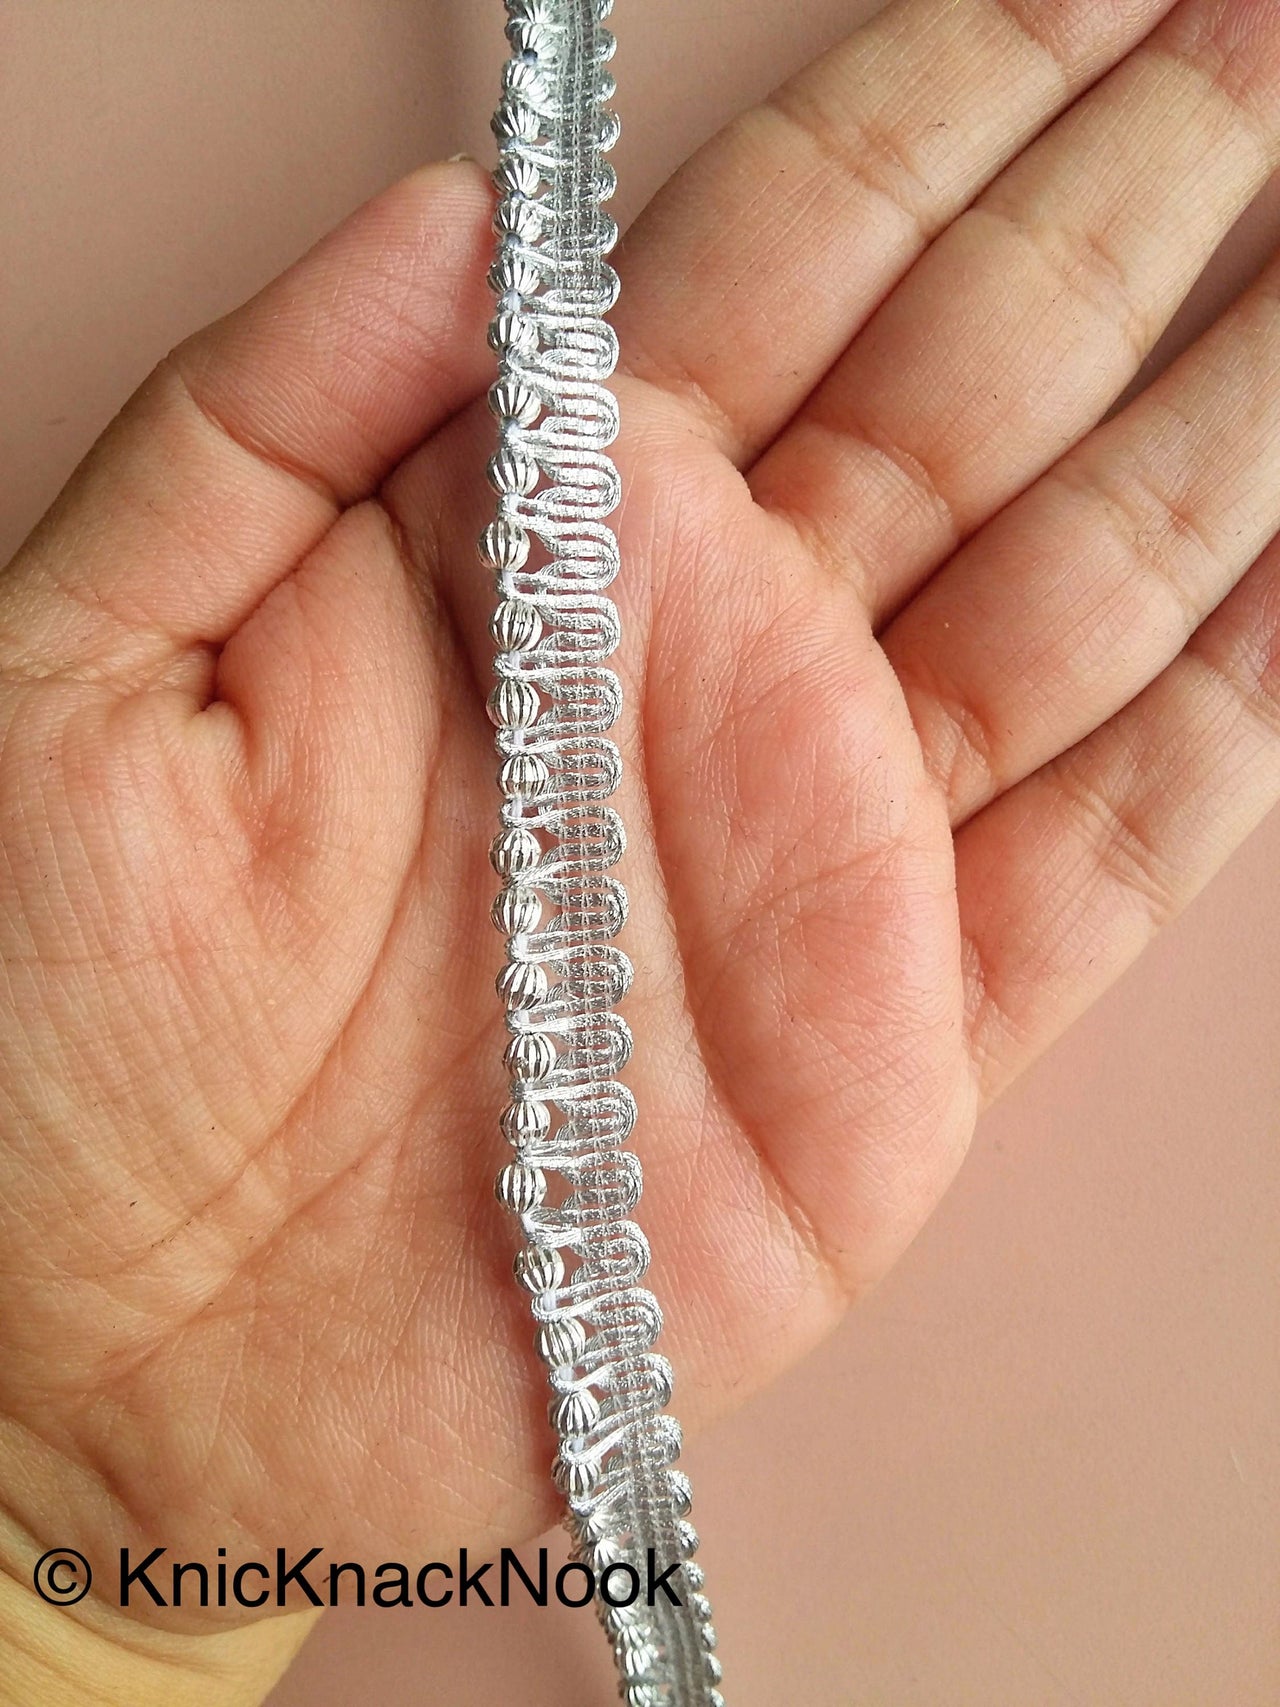 Silver Thread Woven Trim Embellished With Silver Beads, Beaded Trim, Approx. 10 mm wide - 200317L326